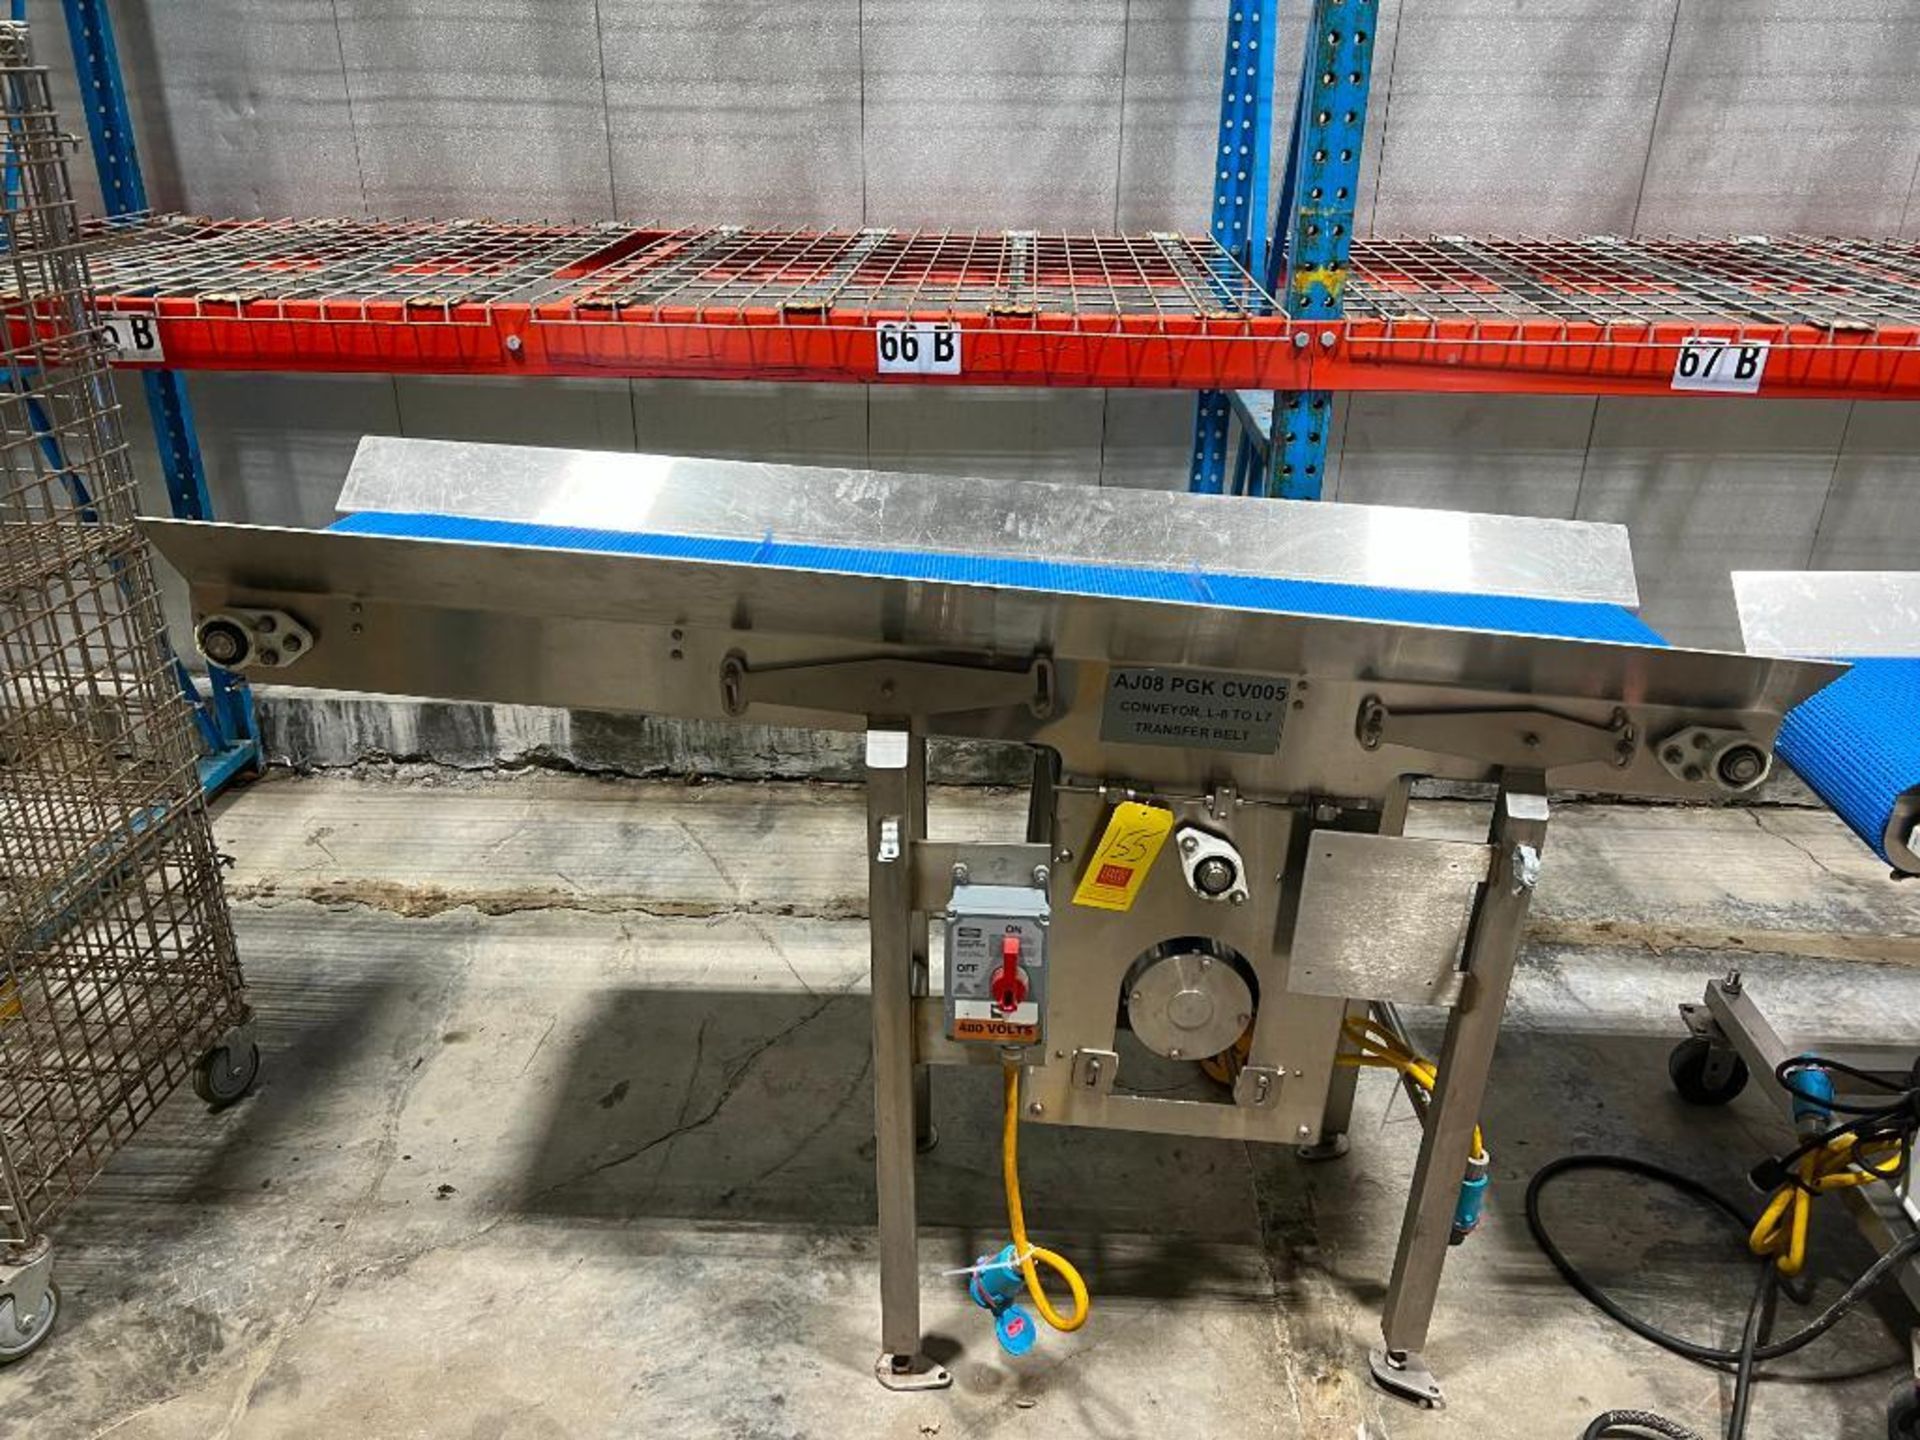 S/S Frame Product Conveyor with Drive, Dimensions = 74" Length x 16" Width - Rigging Fee: $150